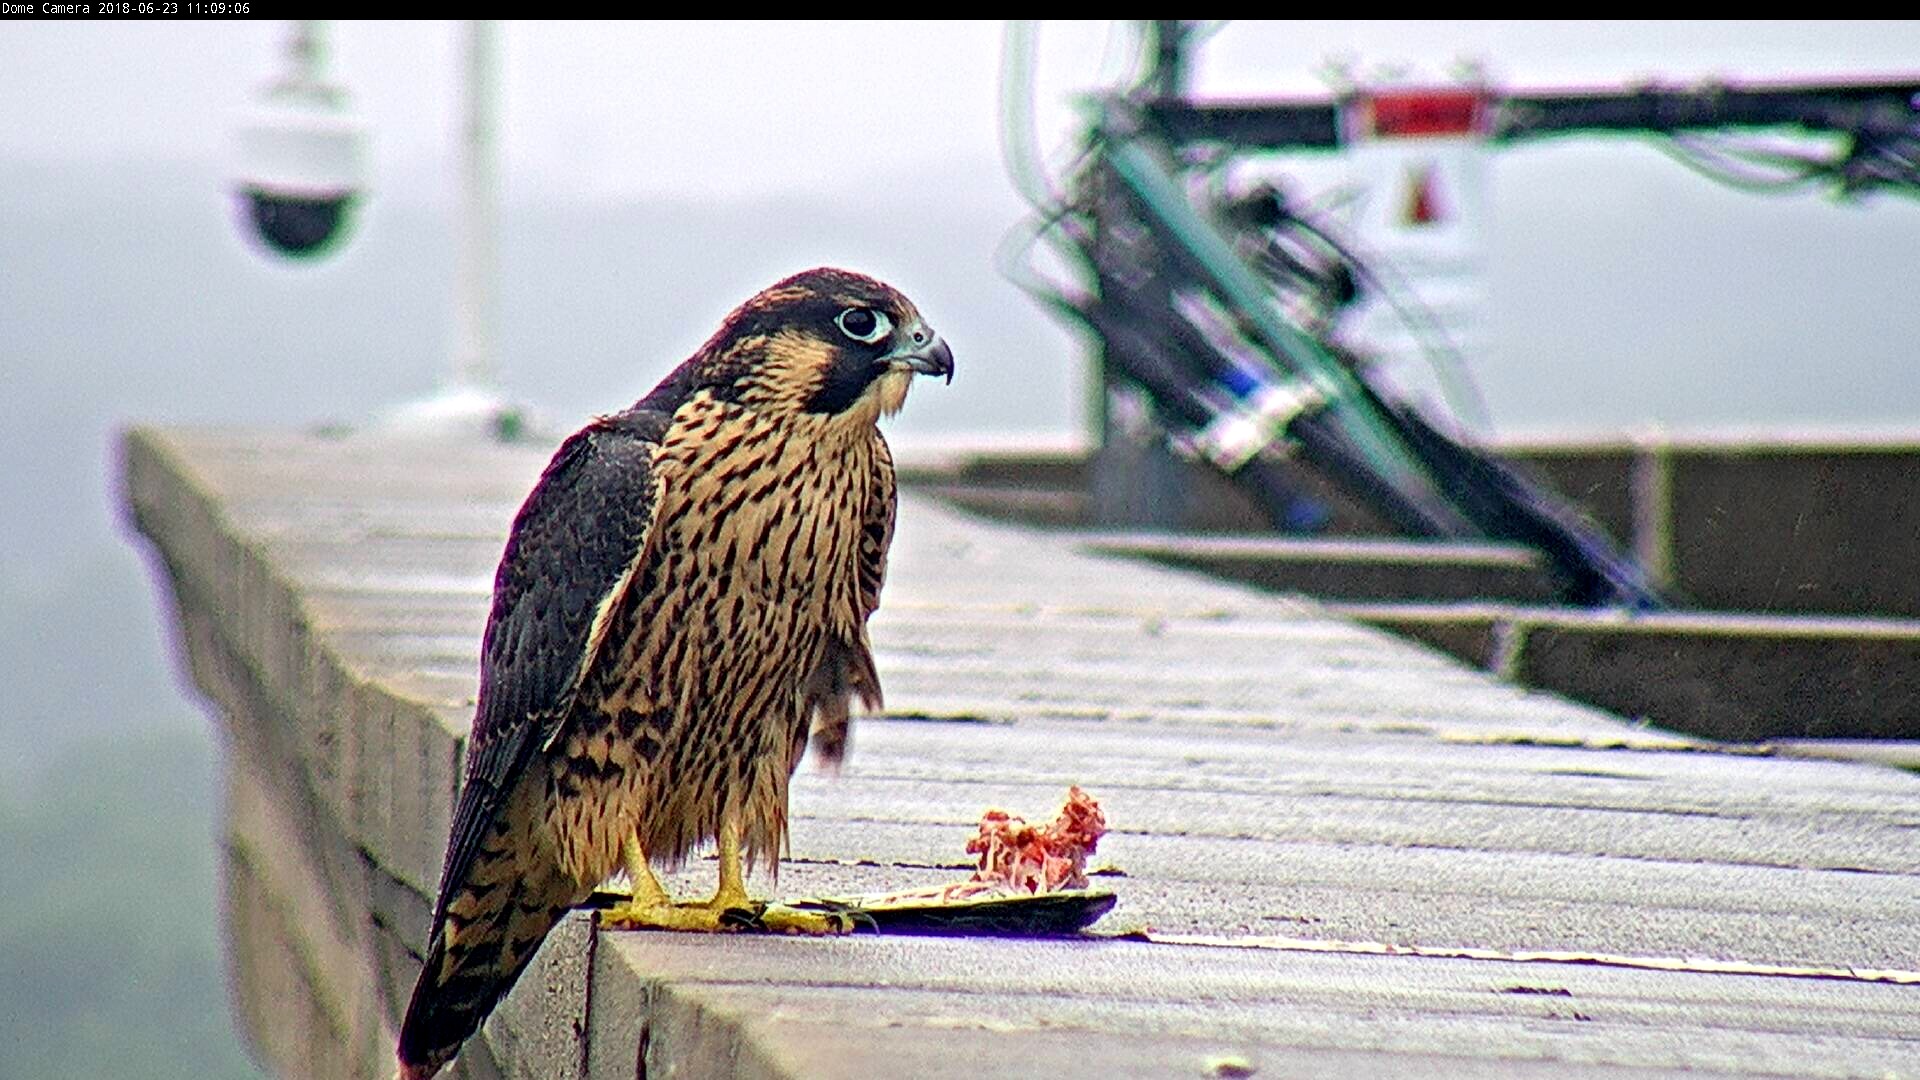 Angel finishes his meal on the roof of the Adirondack Bank